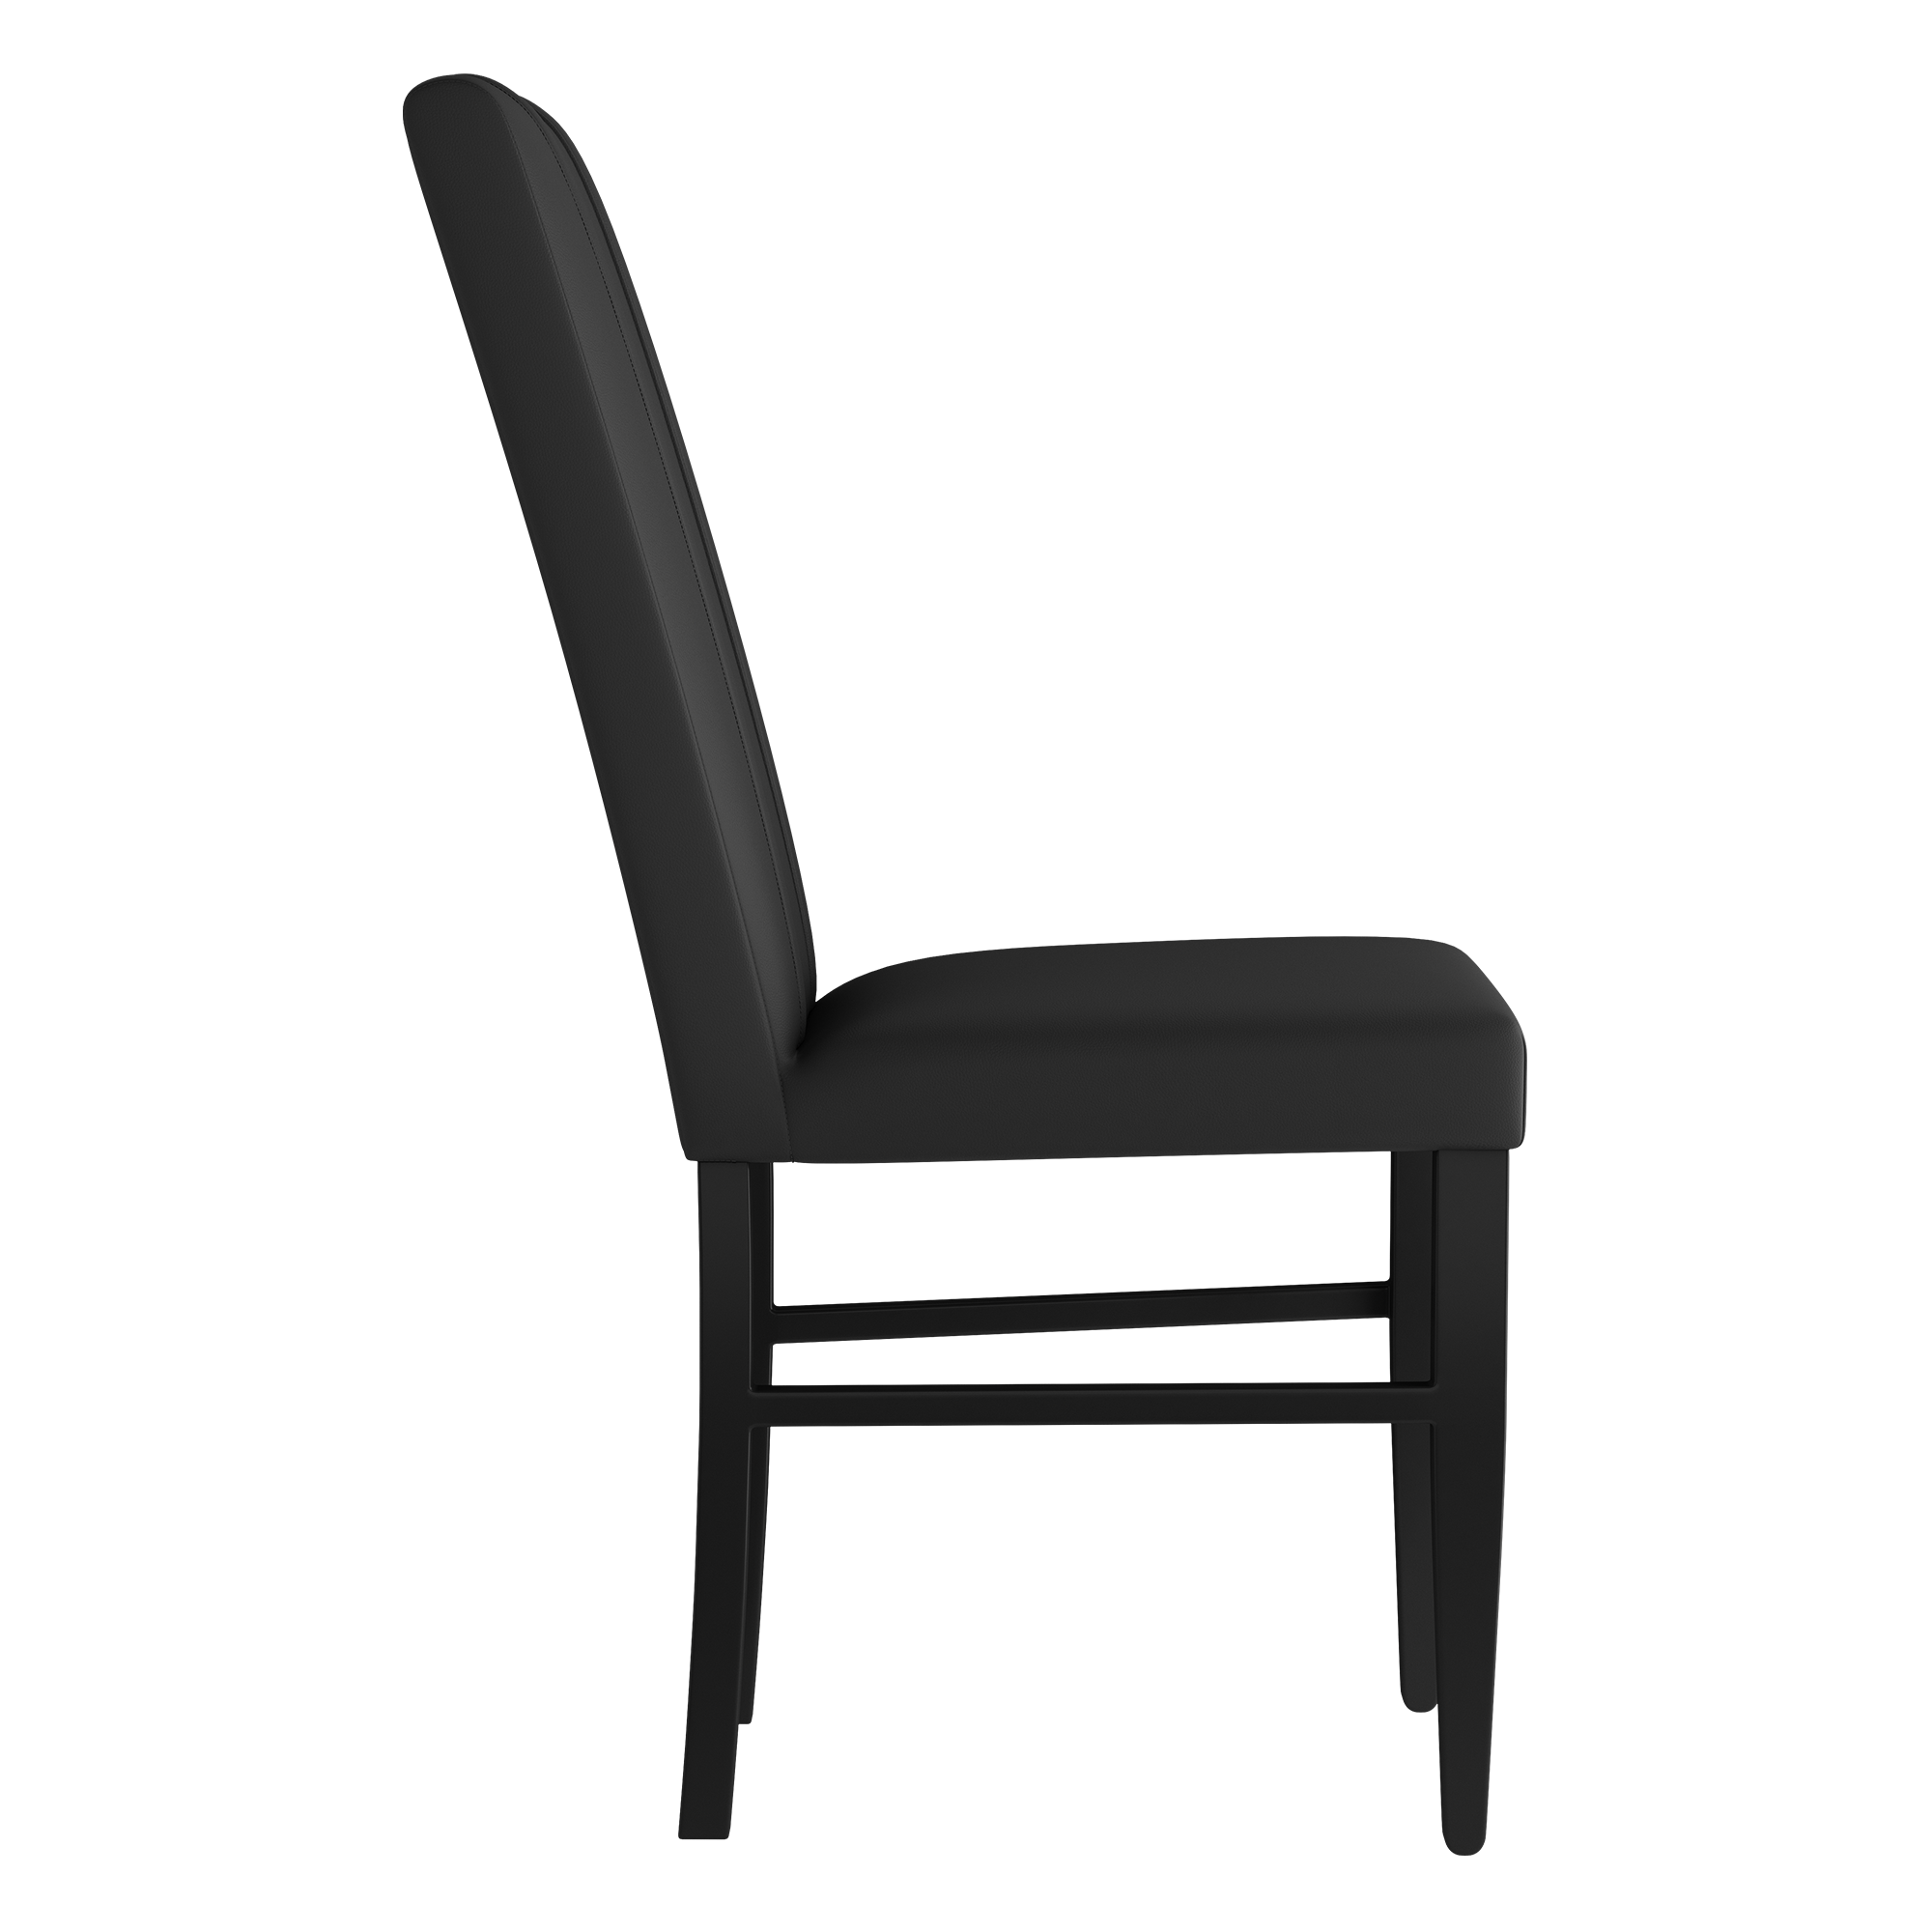 Side Chair 2000 with  Carolina Panthers Secondary Logo Set of 2